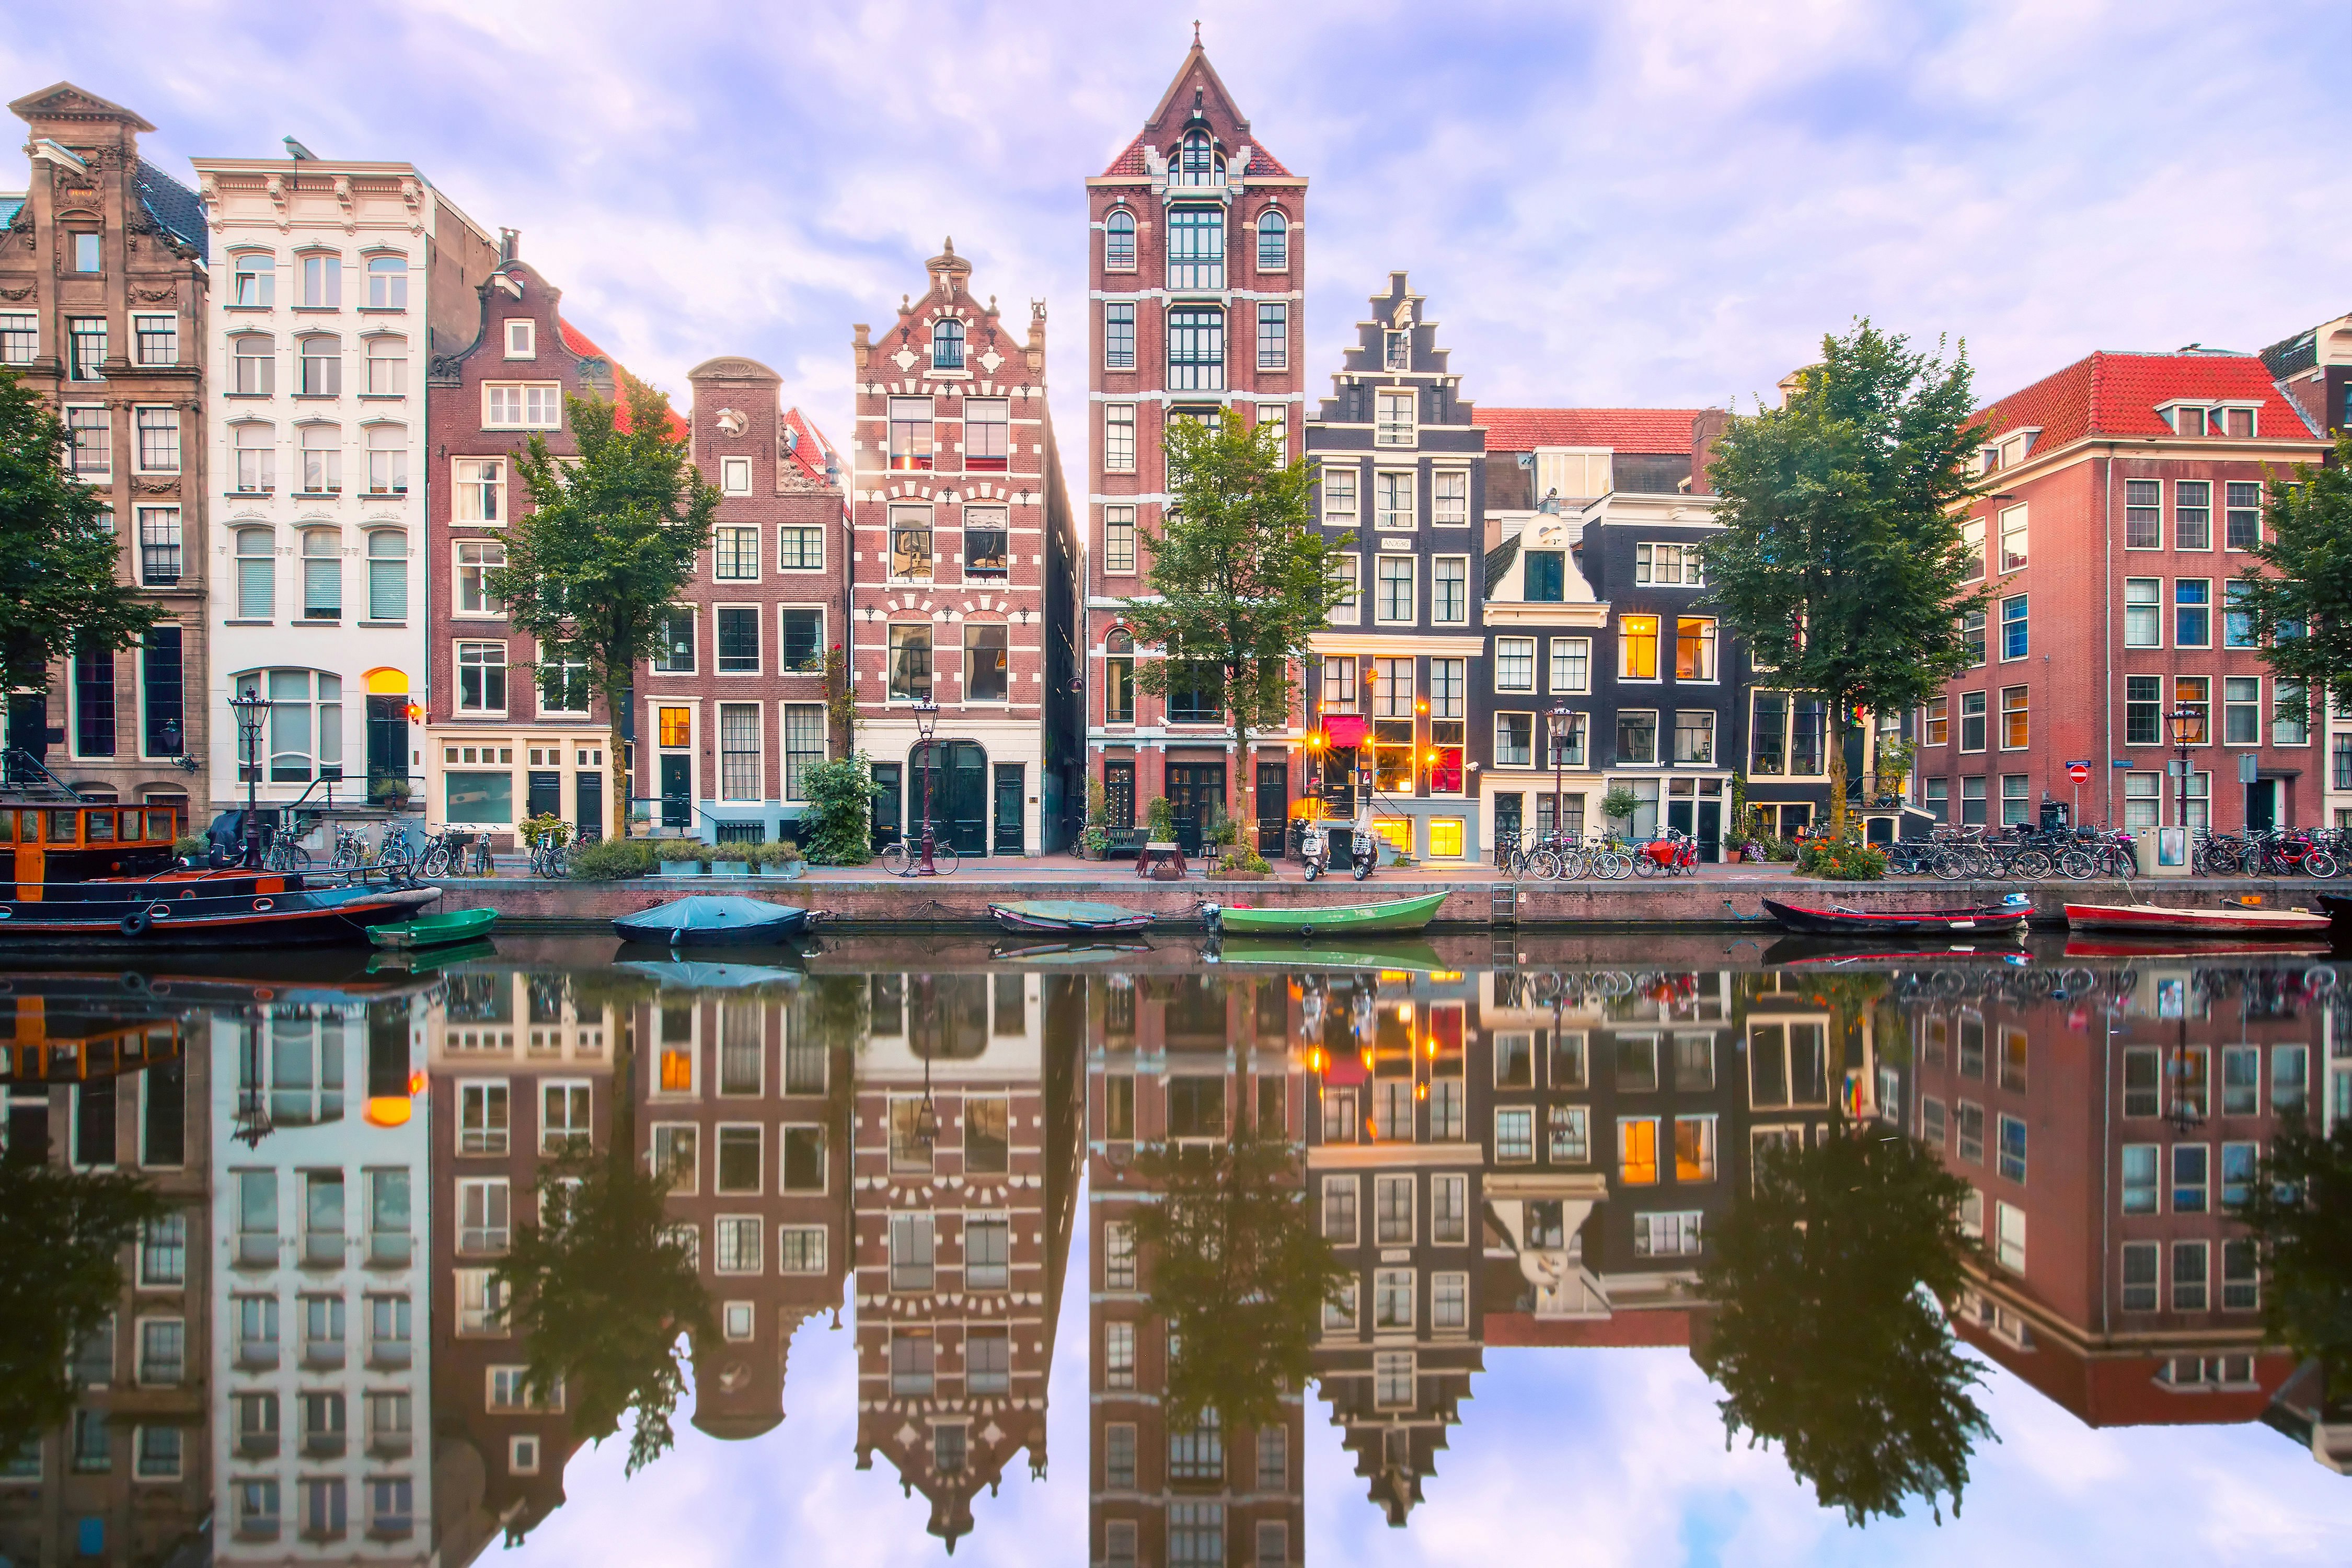 A picture of Amsterdam and its canals